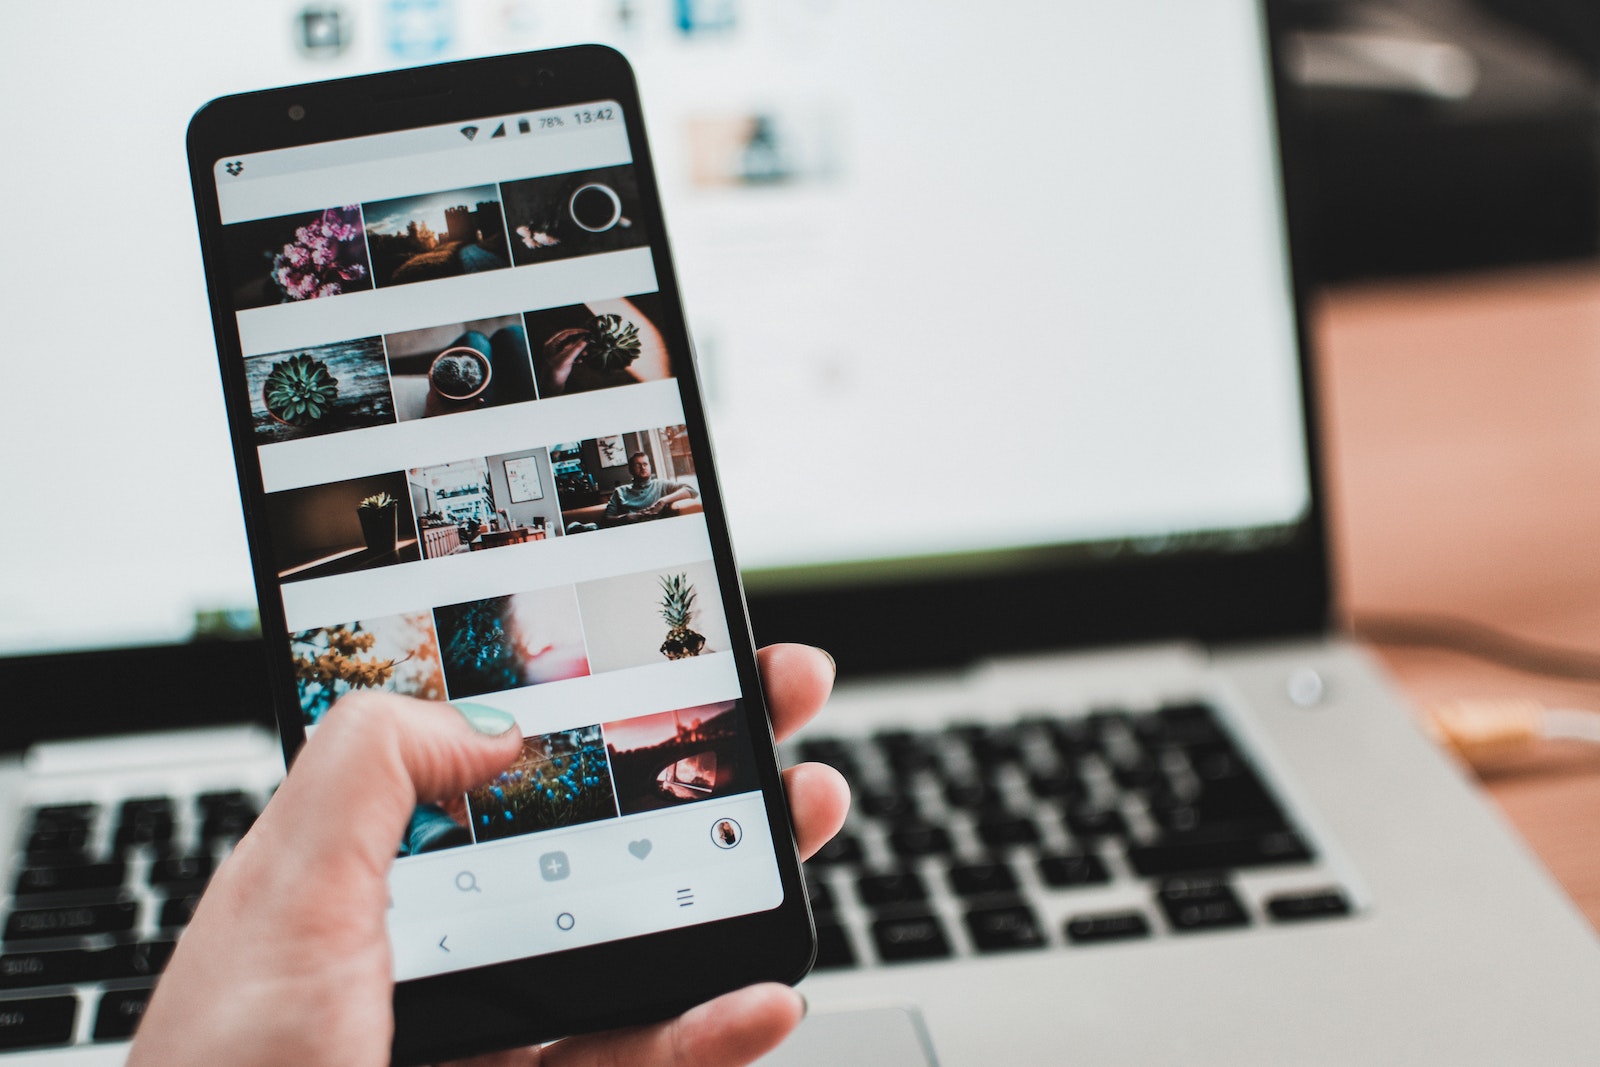 Find Video Editing Clients on Instagram